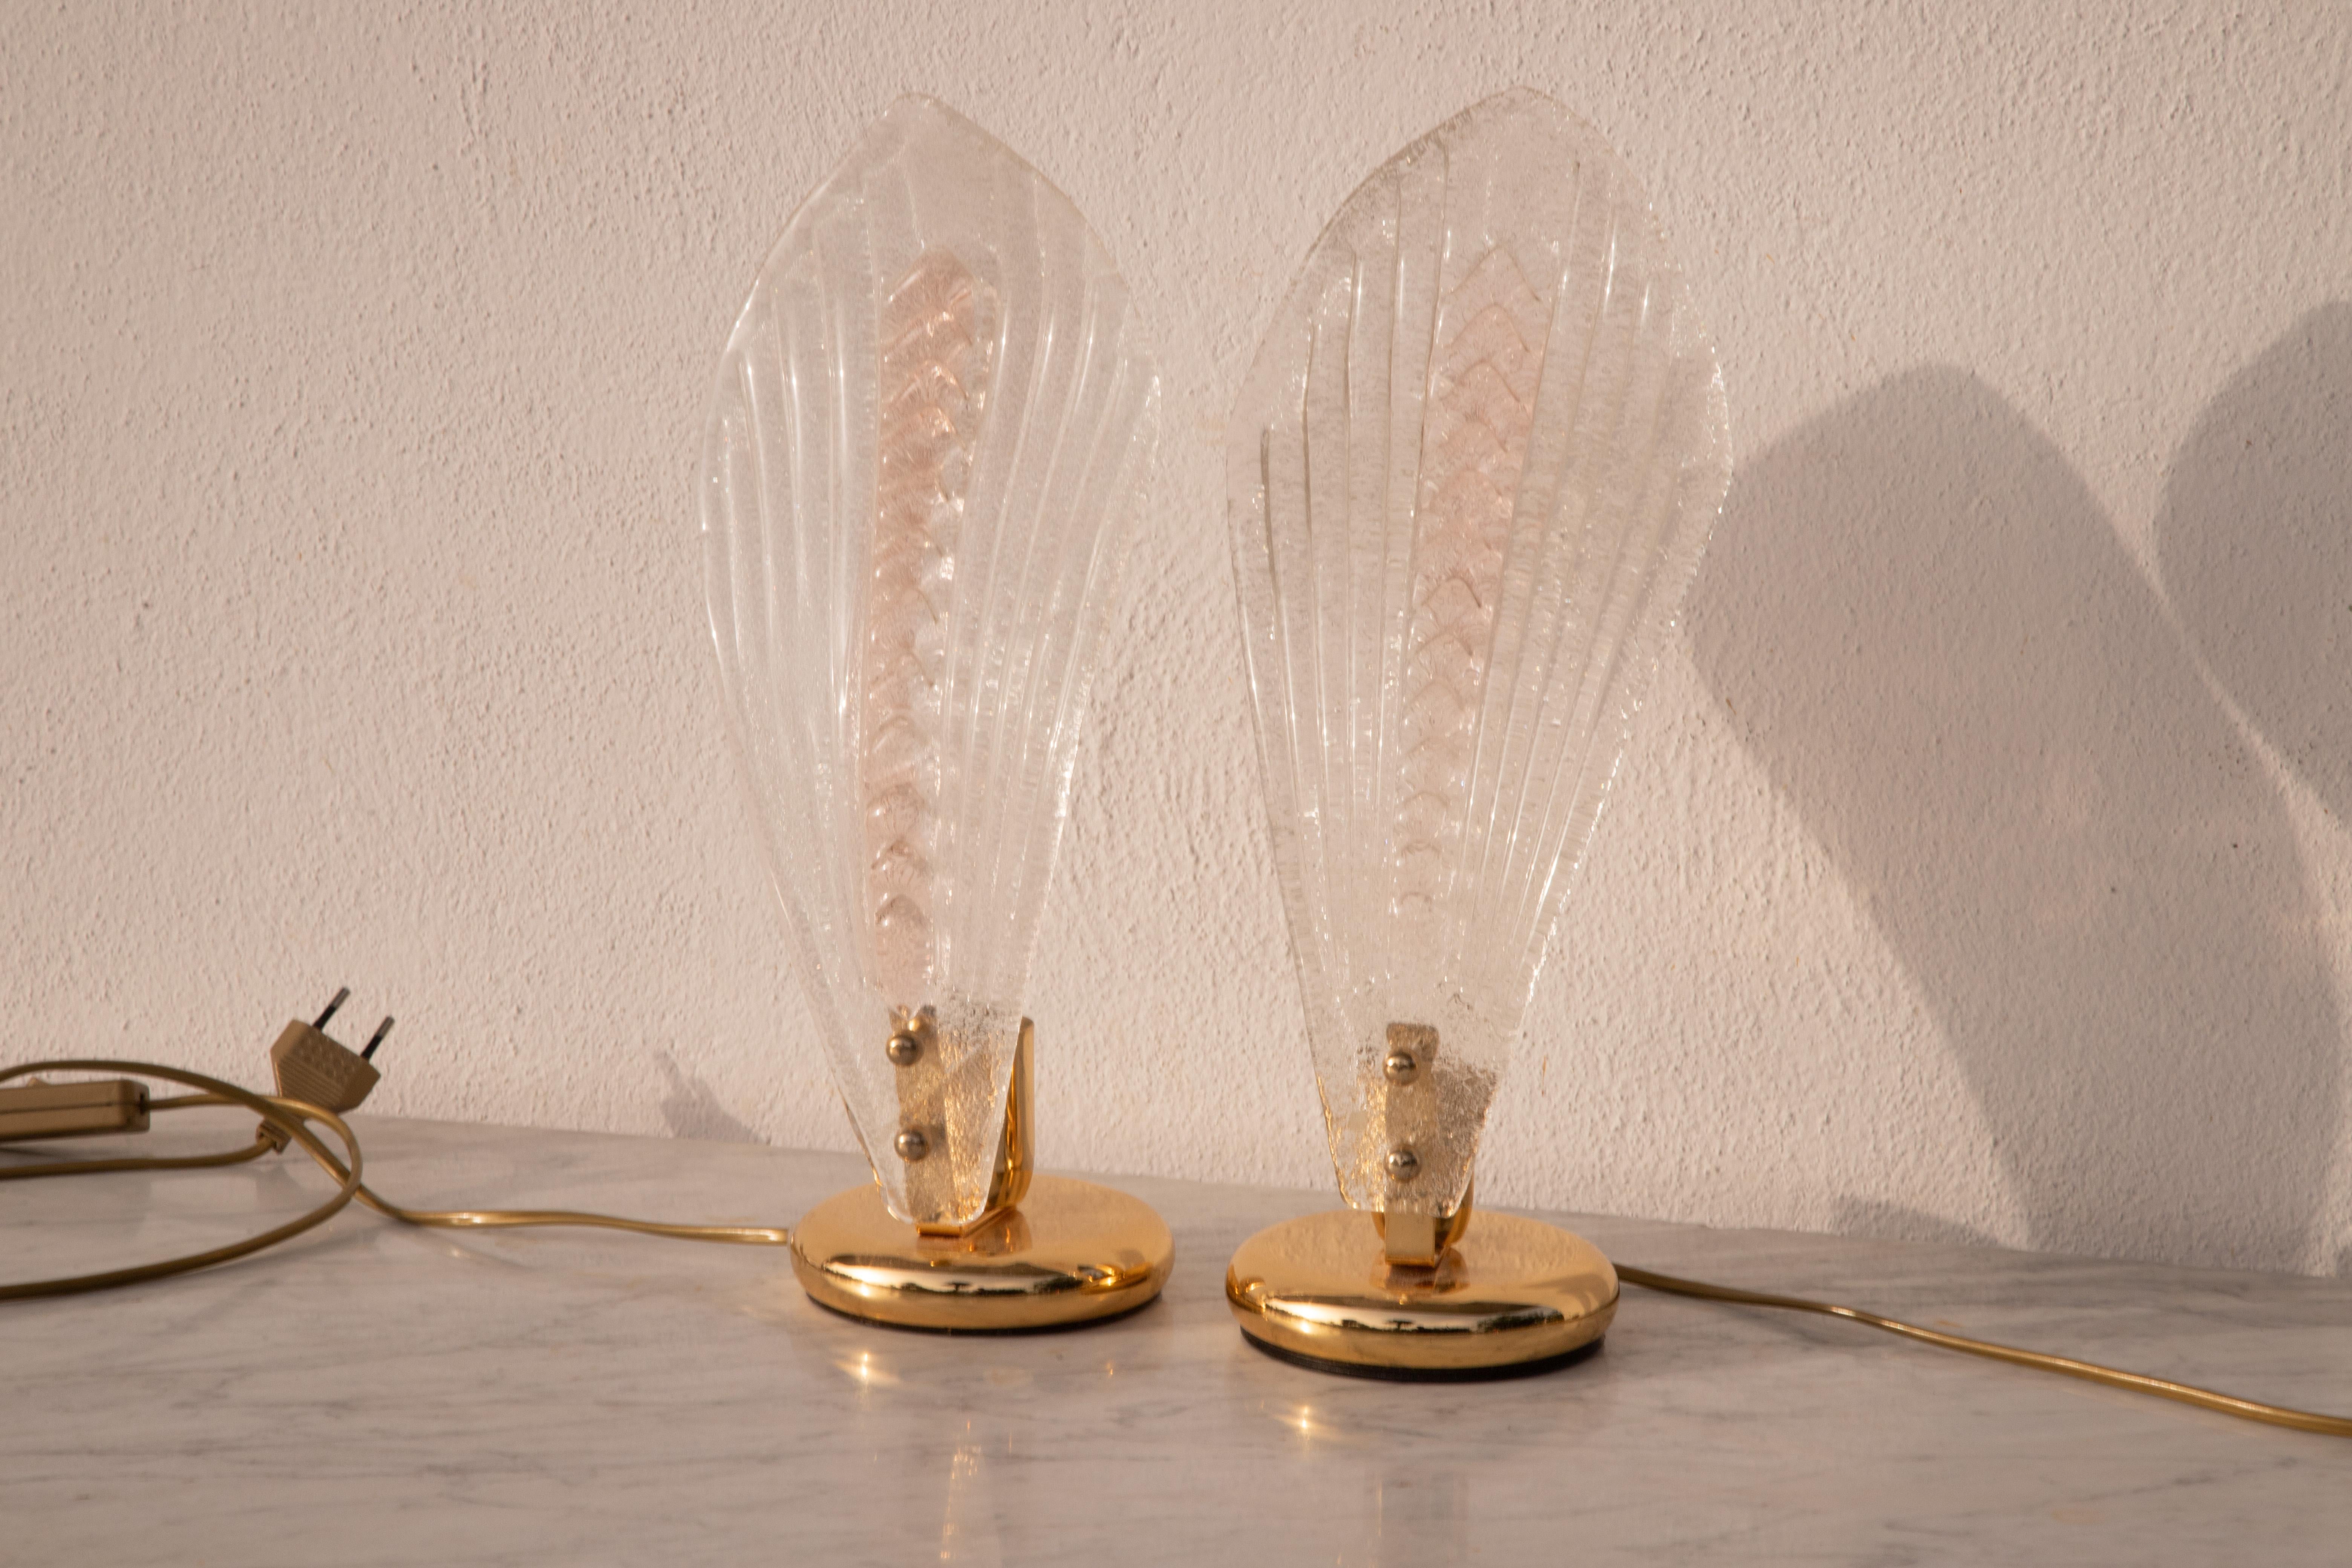 Pair of abatjour table lamps decorated with pink and trasparent Murano glass.
Excellent vintage condition.
Each lamp mounts an e14 socket, possibility of wiring for Usa.
Height 40 centimeters, diameter 15 centimeters.